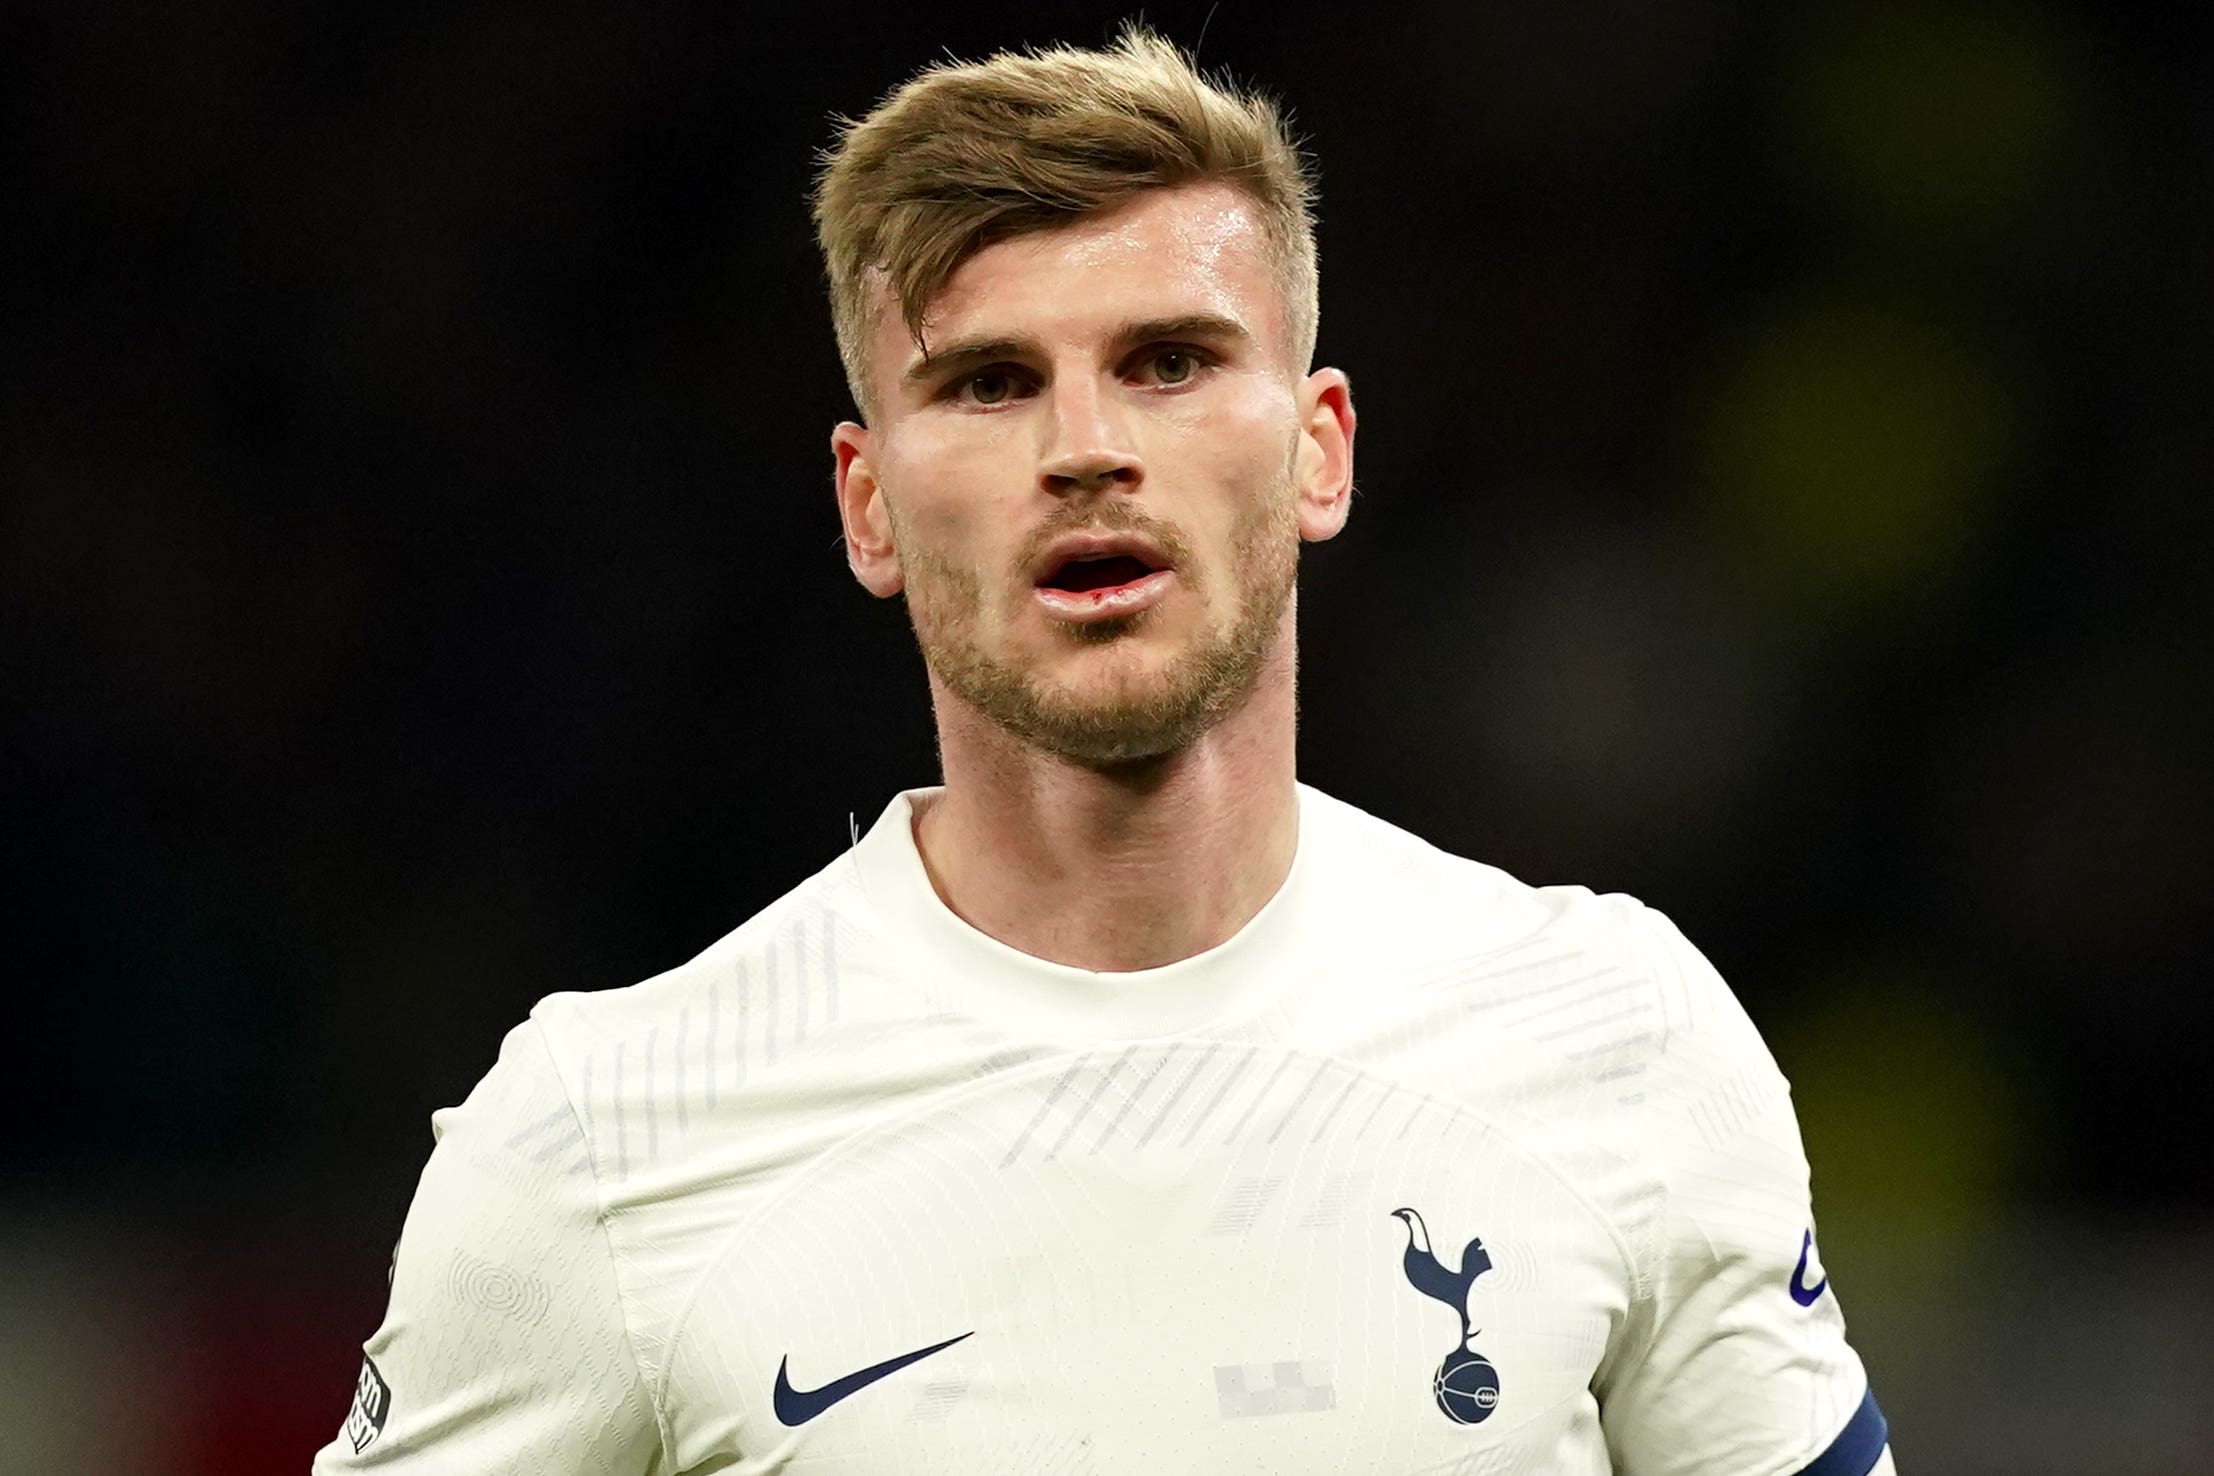 Tottenham star Micky van de Ven says the pace of Timo Werner makes him a real threat.